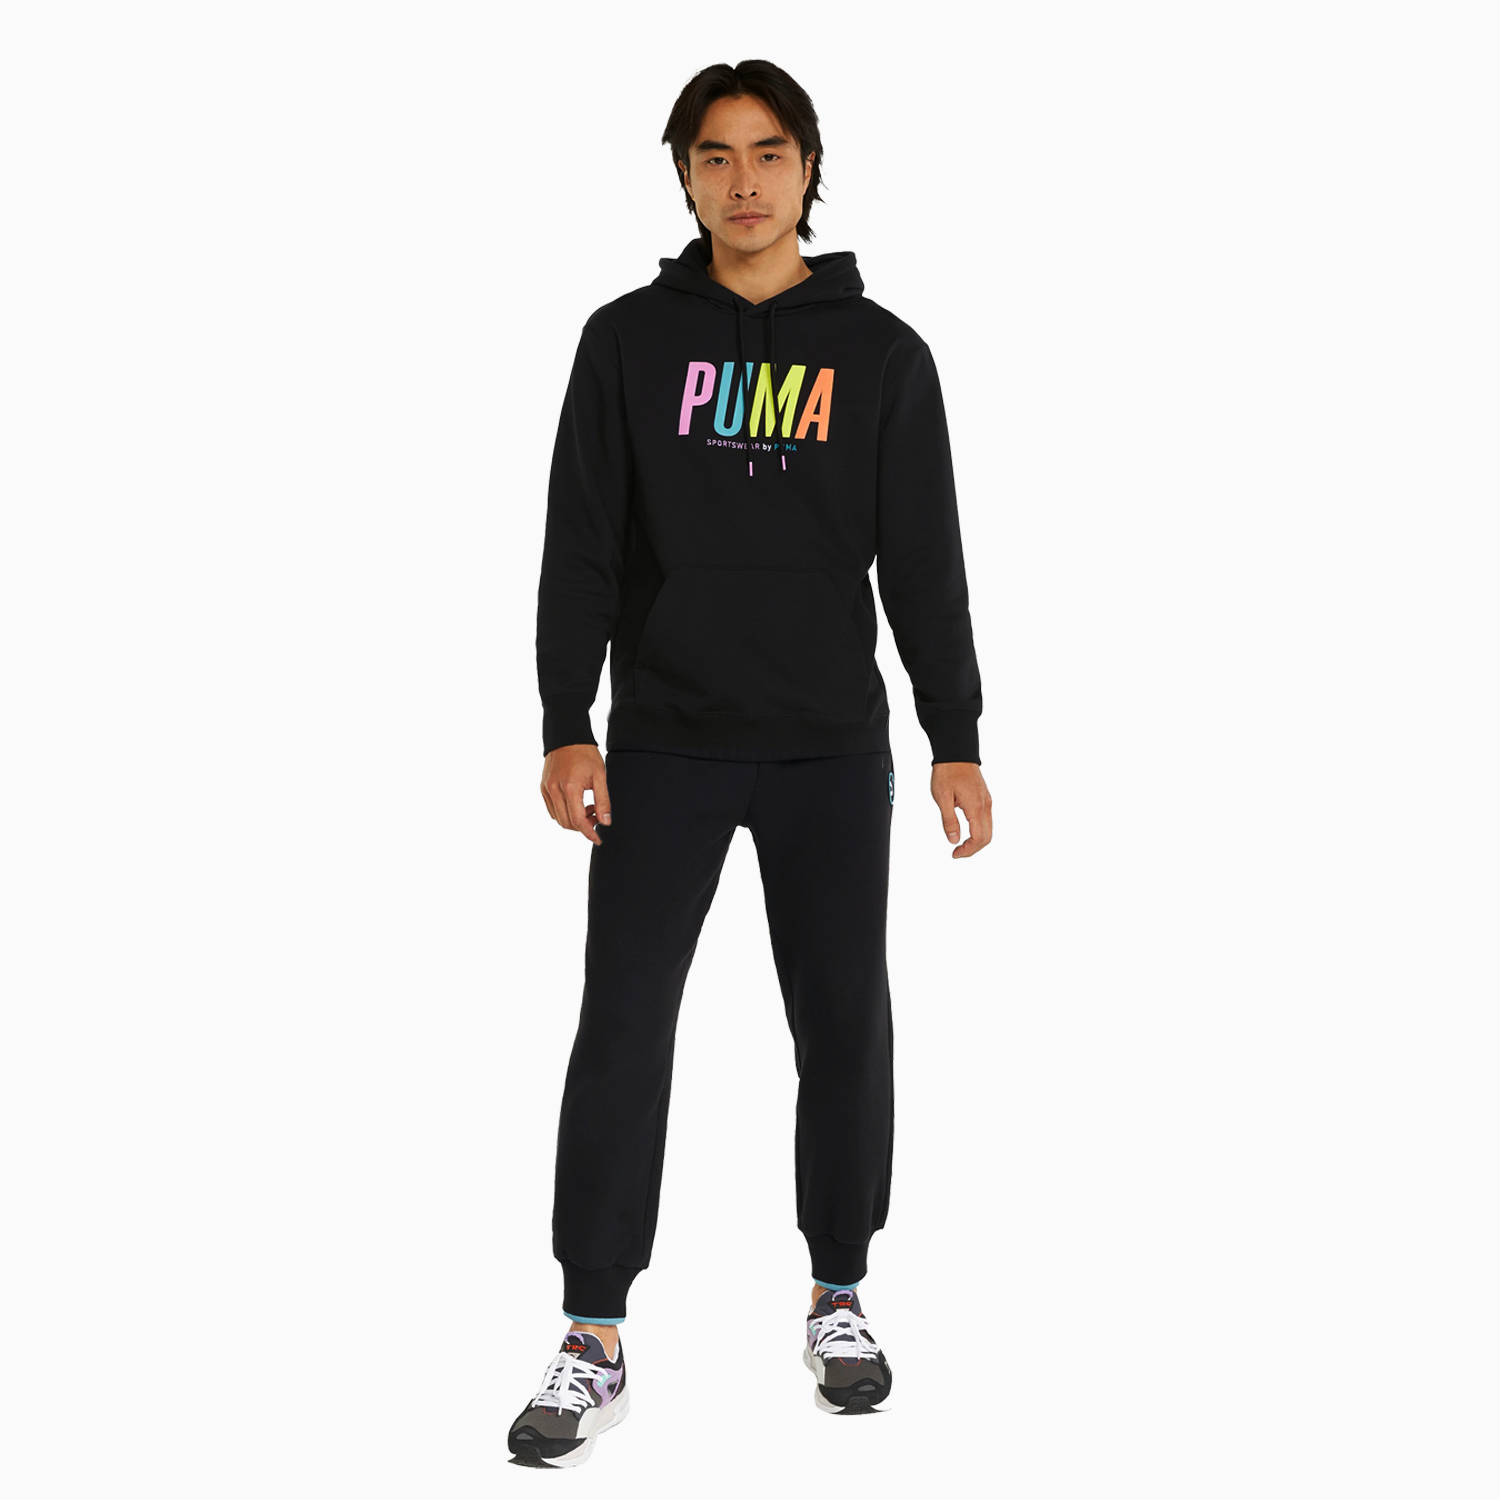 puma-mens-swxp-graphic-outfit-533621-01-533620-01